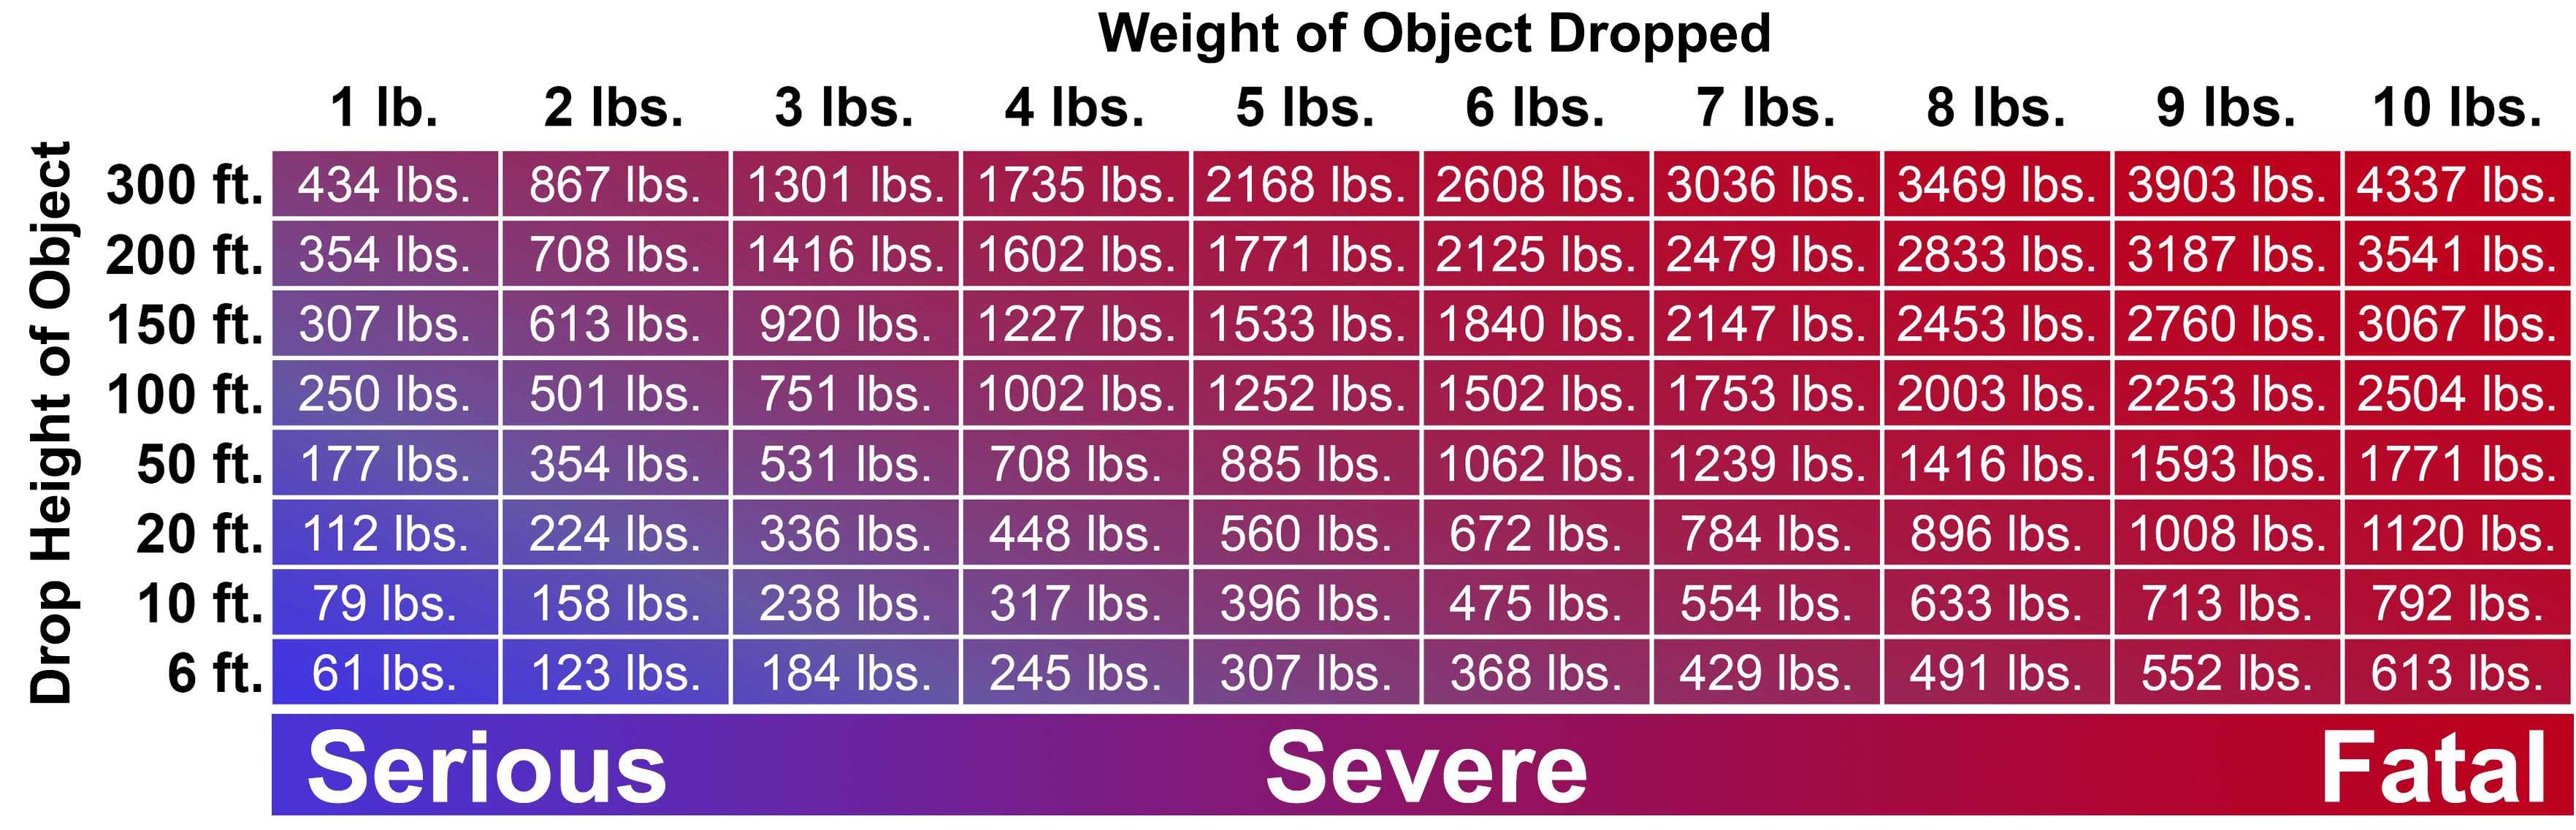 This infographic shows the relative weight of an object falling from various distances and the severity the impact could cause